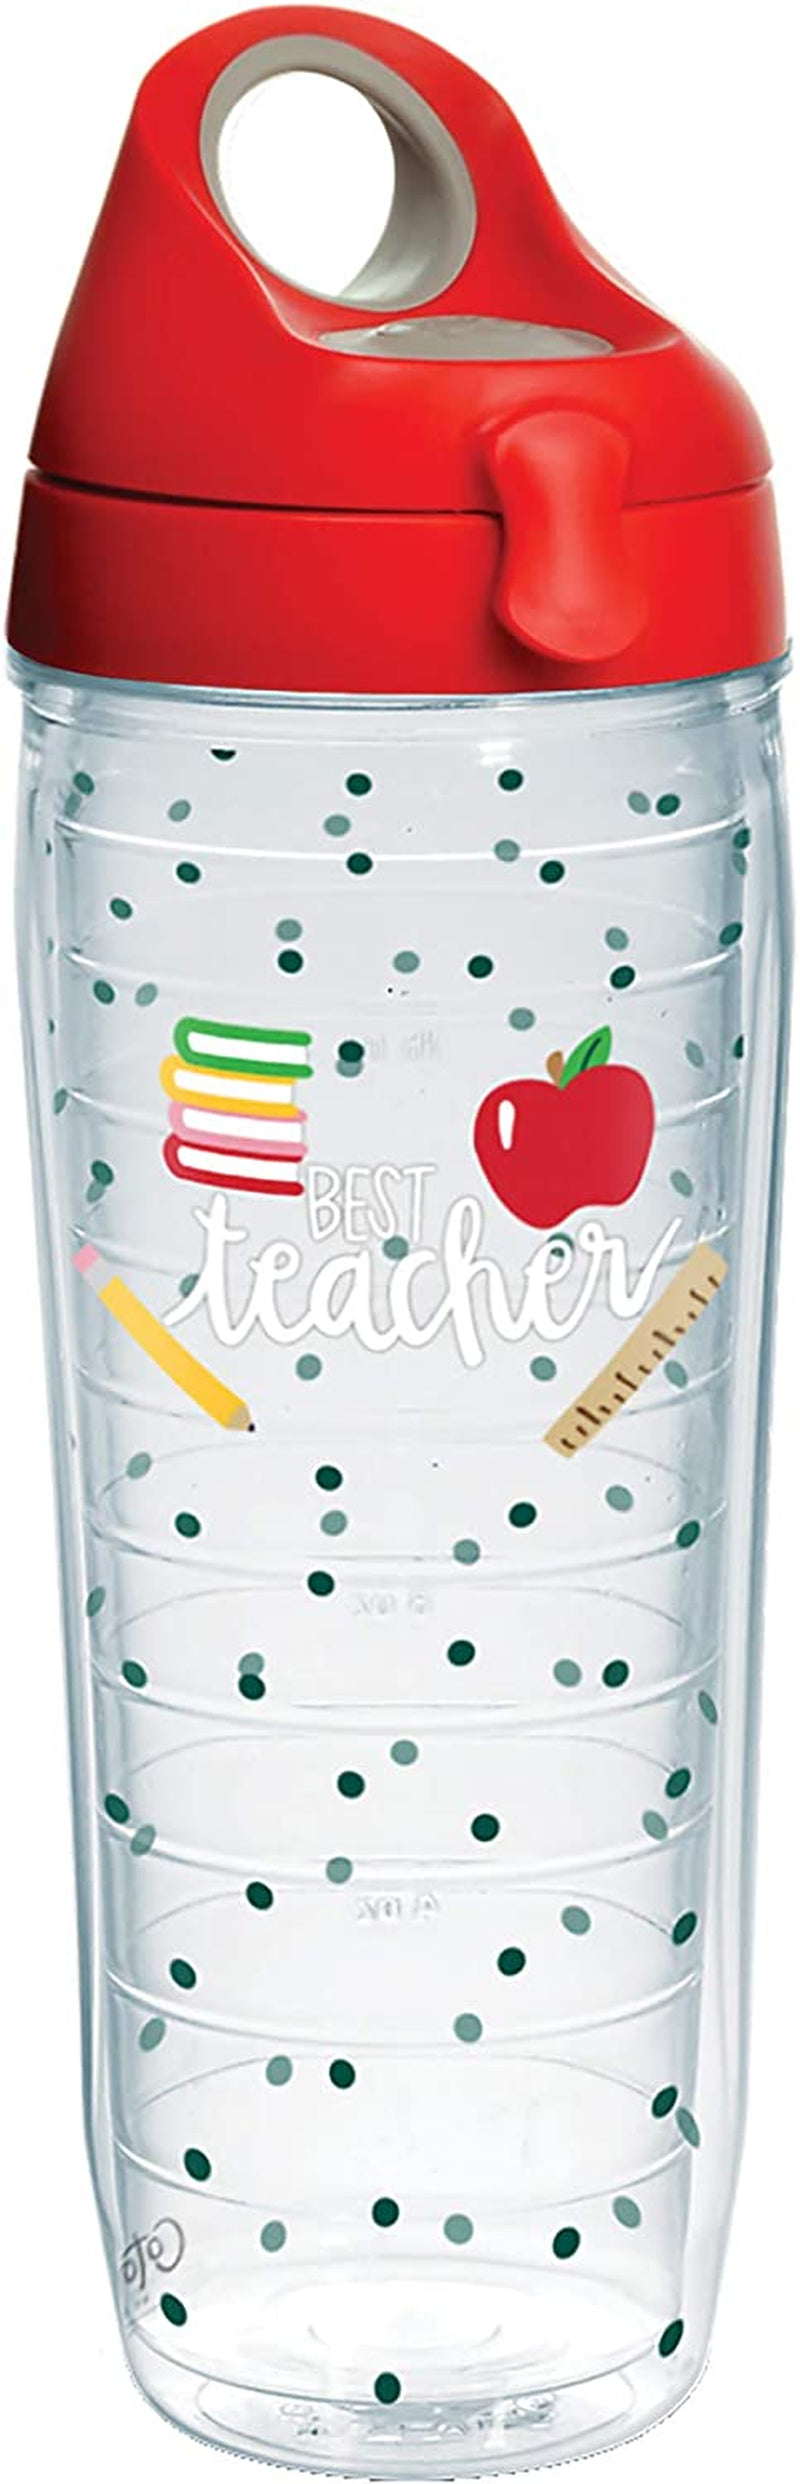 Tervis Coton Colors - Love Stripes Insulated Tumbler with Wrap and Red Lid, 16Oz, Clear